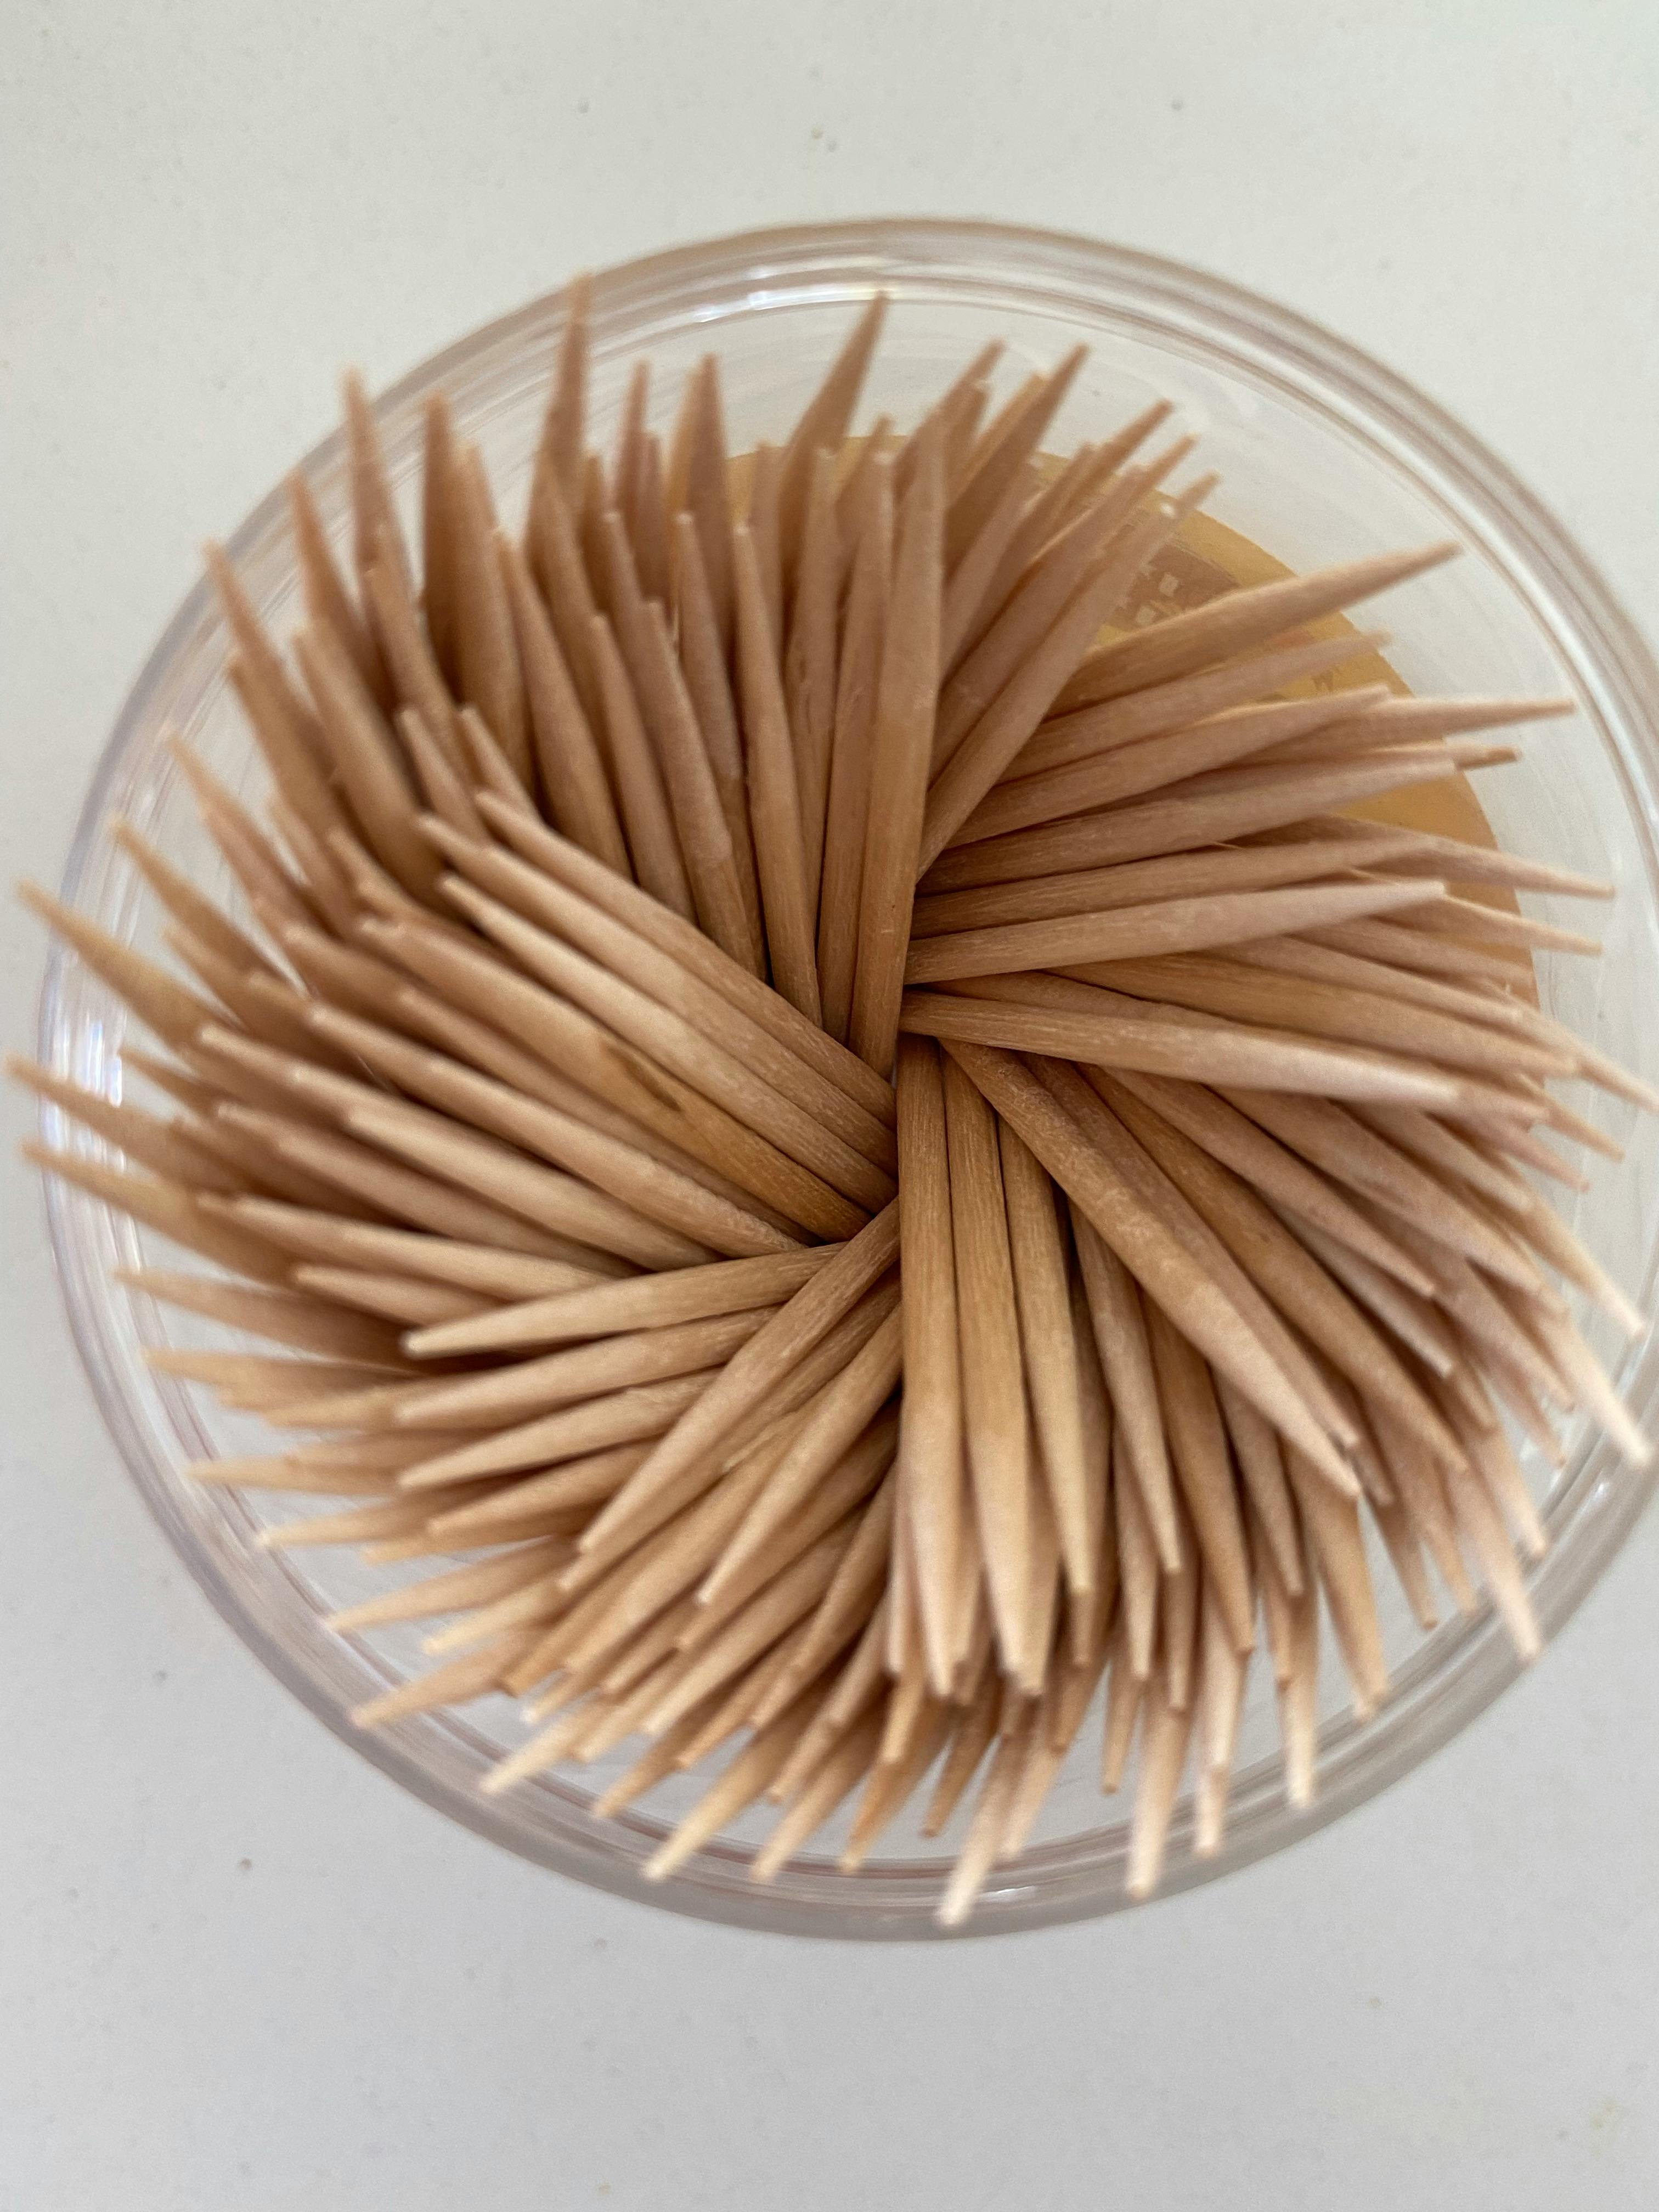 A bunch of toothpicks | Source: Pexels